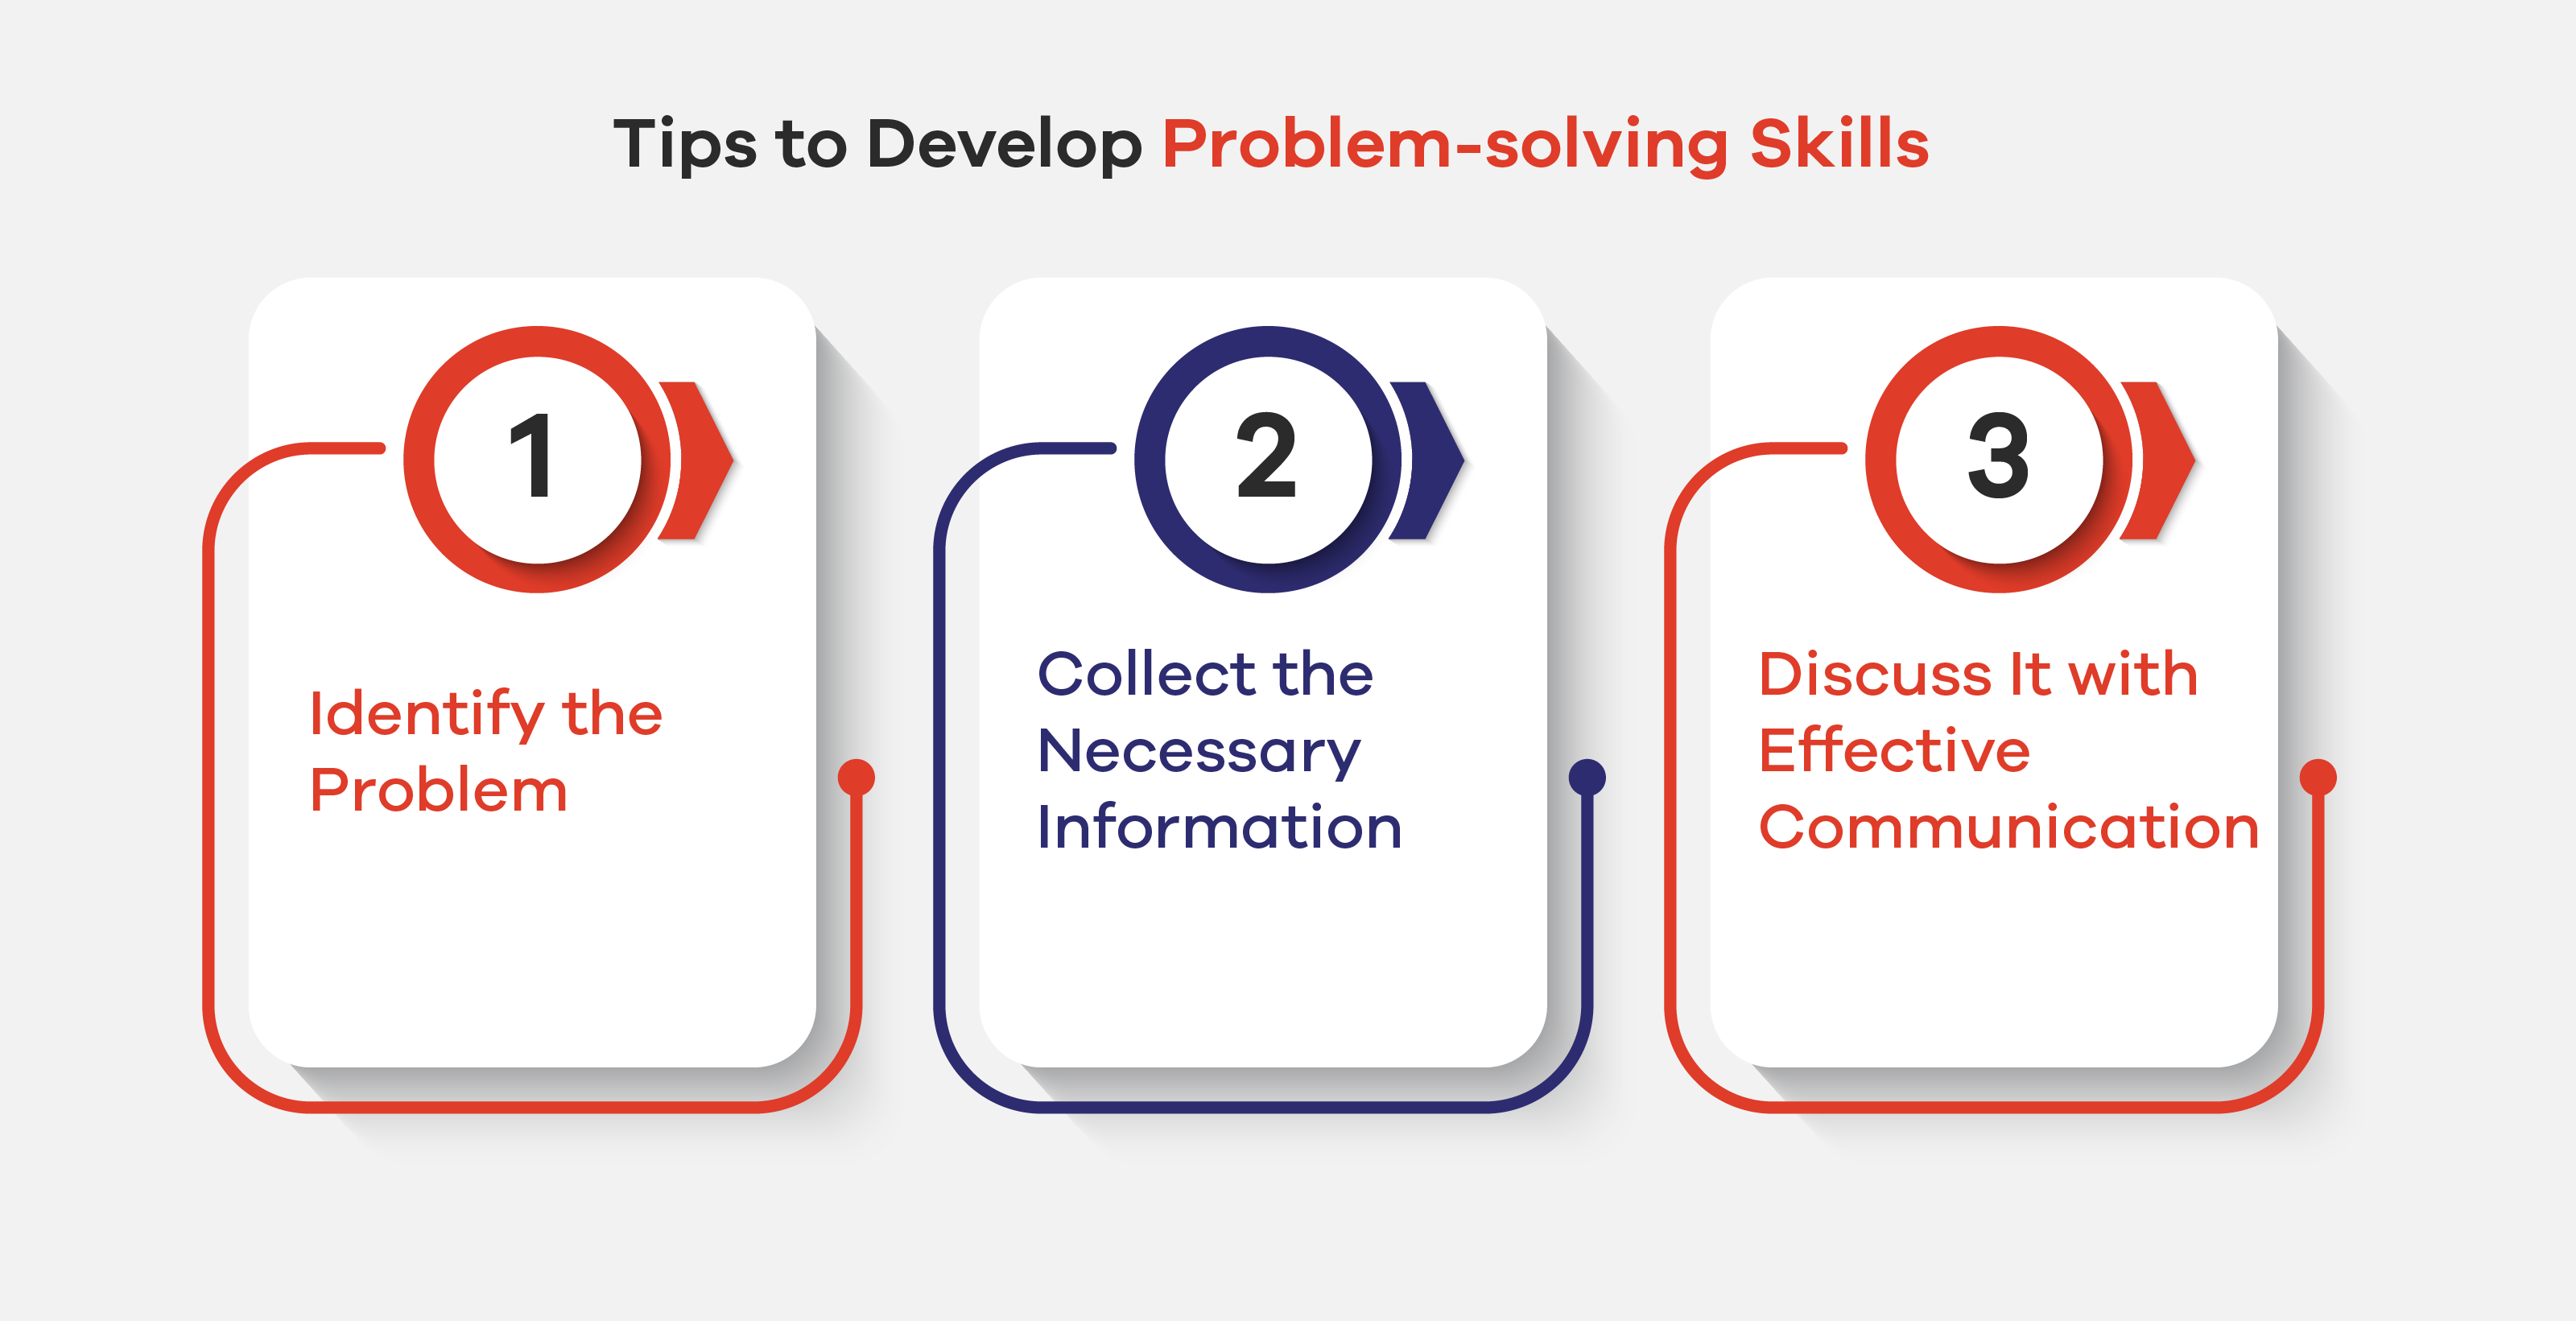 Tips to Develop Problem-solving Skills